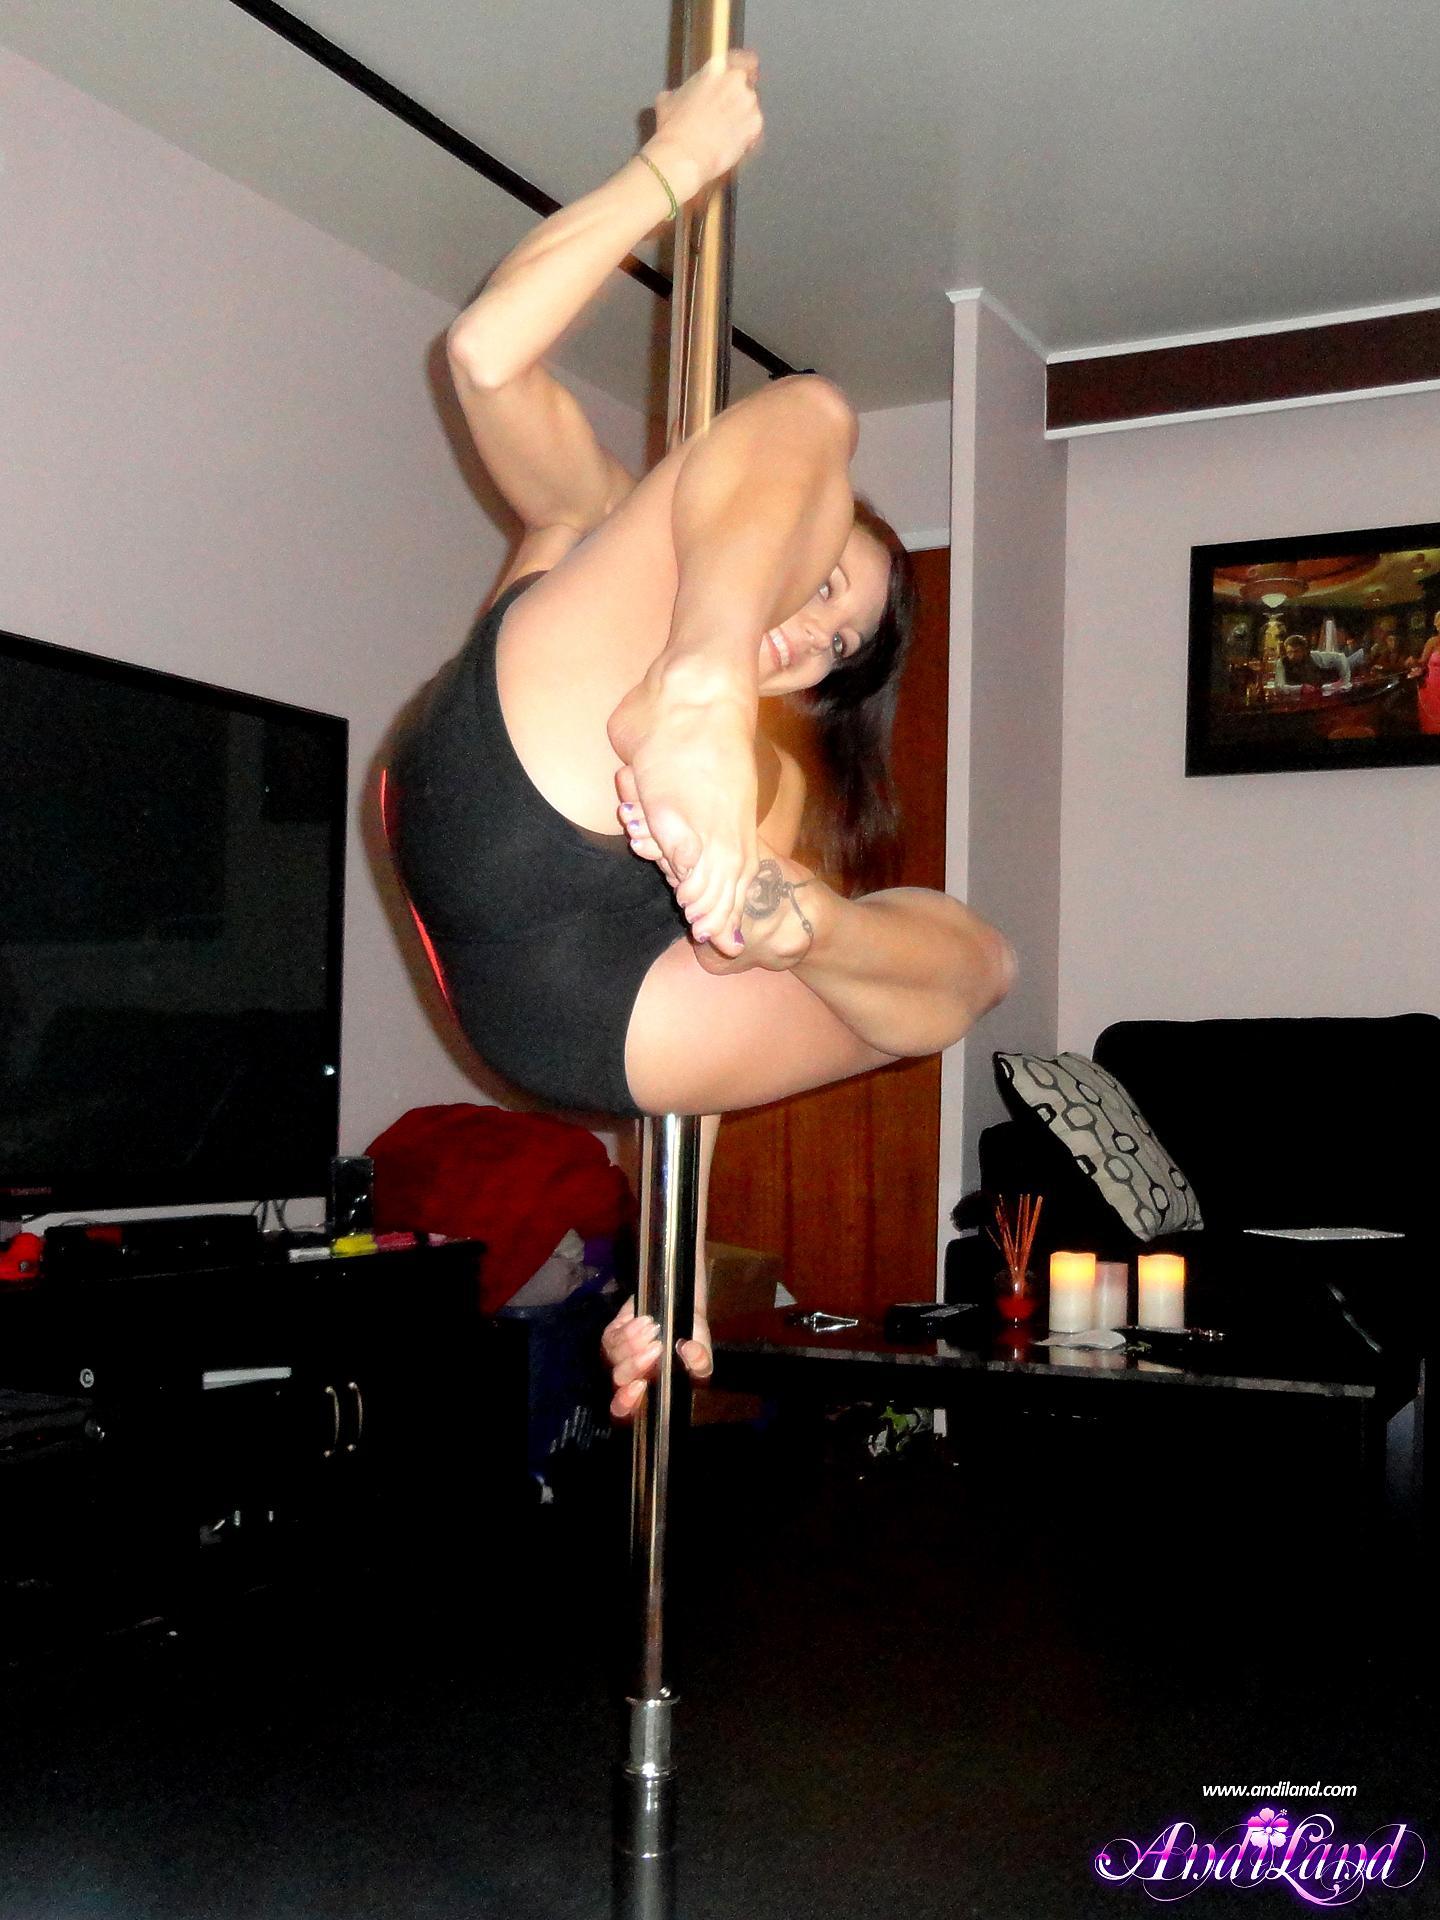 Pictures of hot teen Andi Land working the stripper pole #53141383